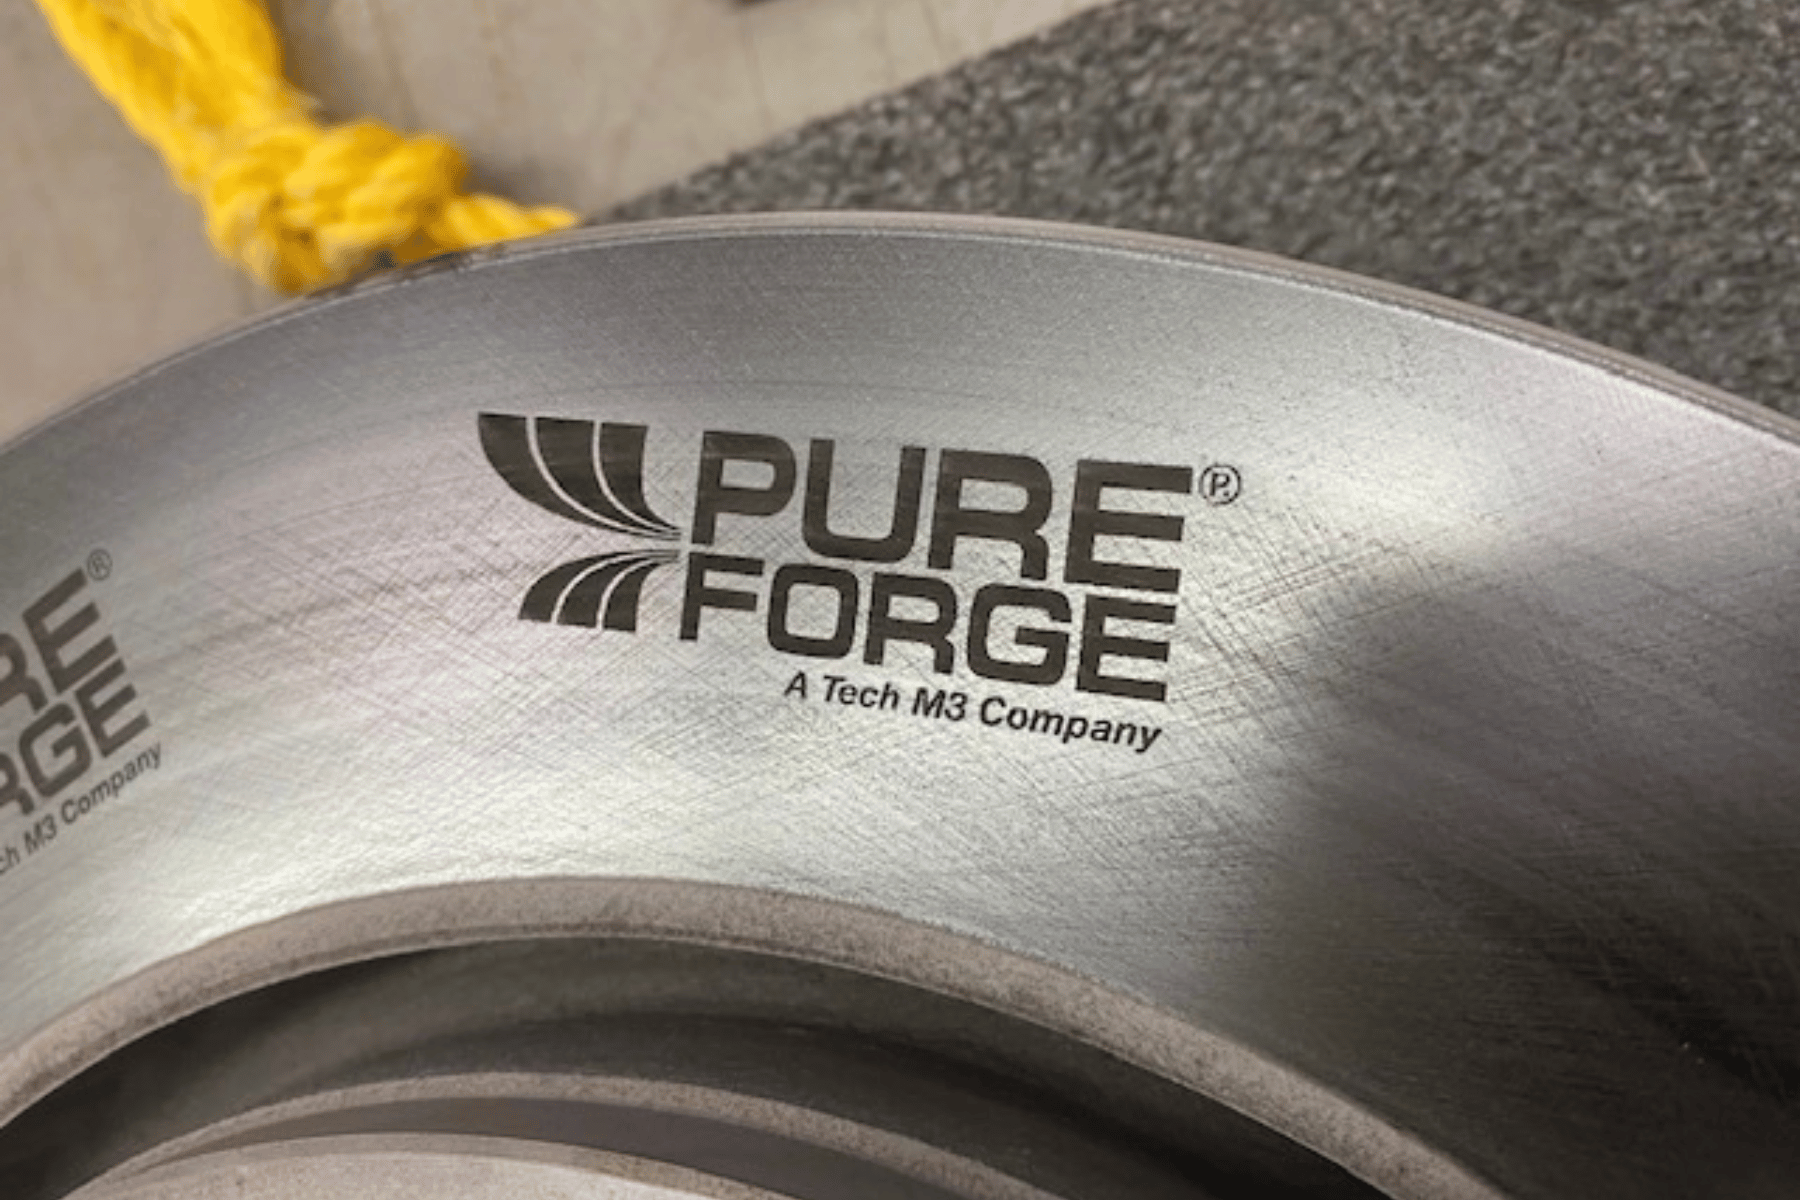 PureForge® moved its manufacturing and testing operations from California to Troy, Michigan